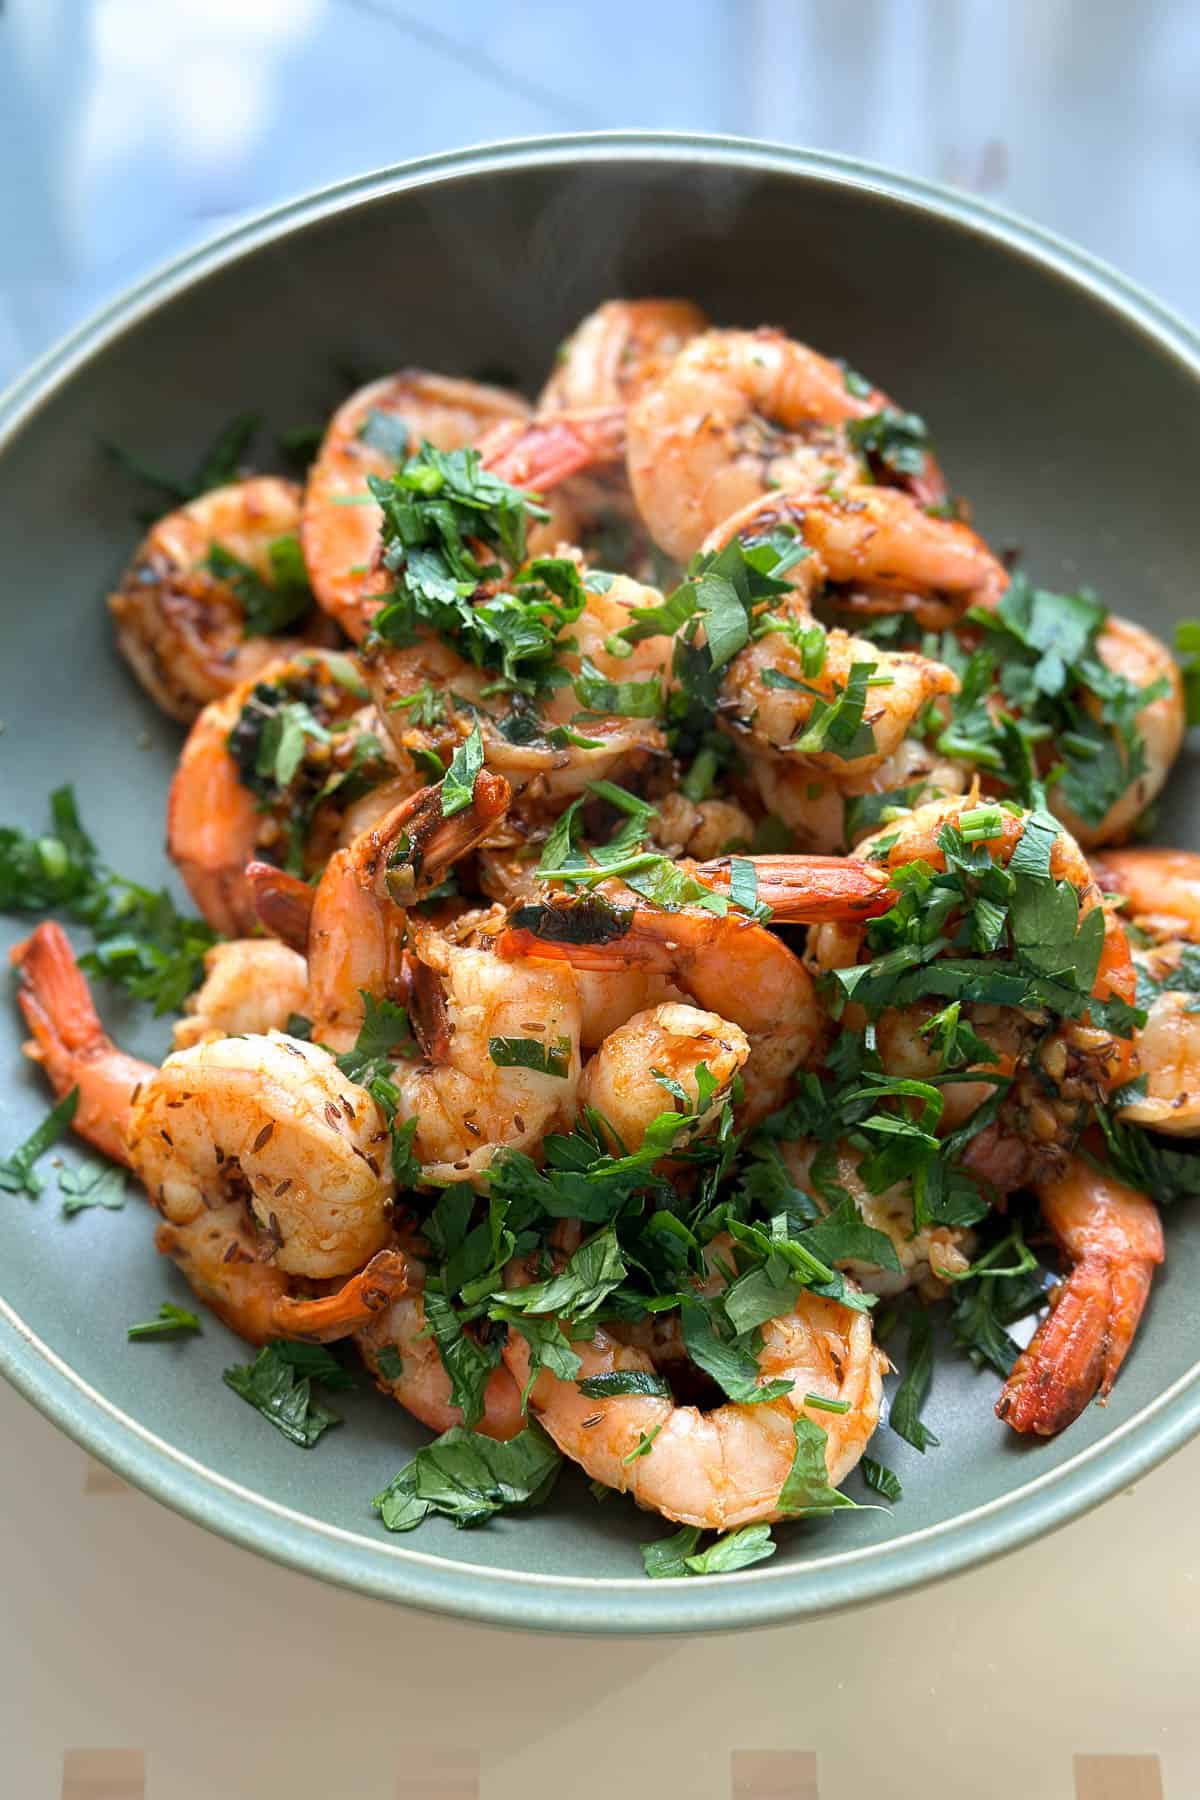 Paprika Shrimp in a plate, ready to eat.